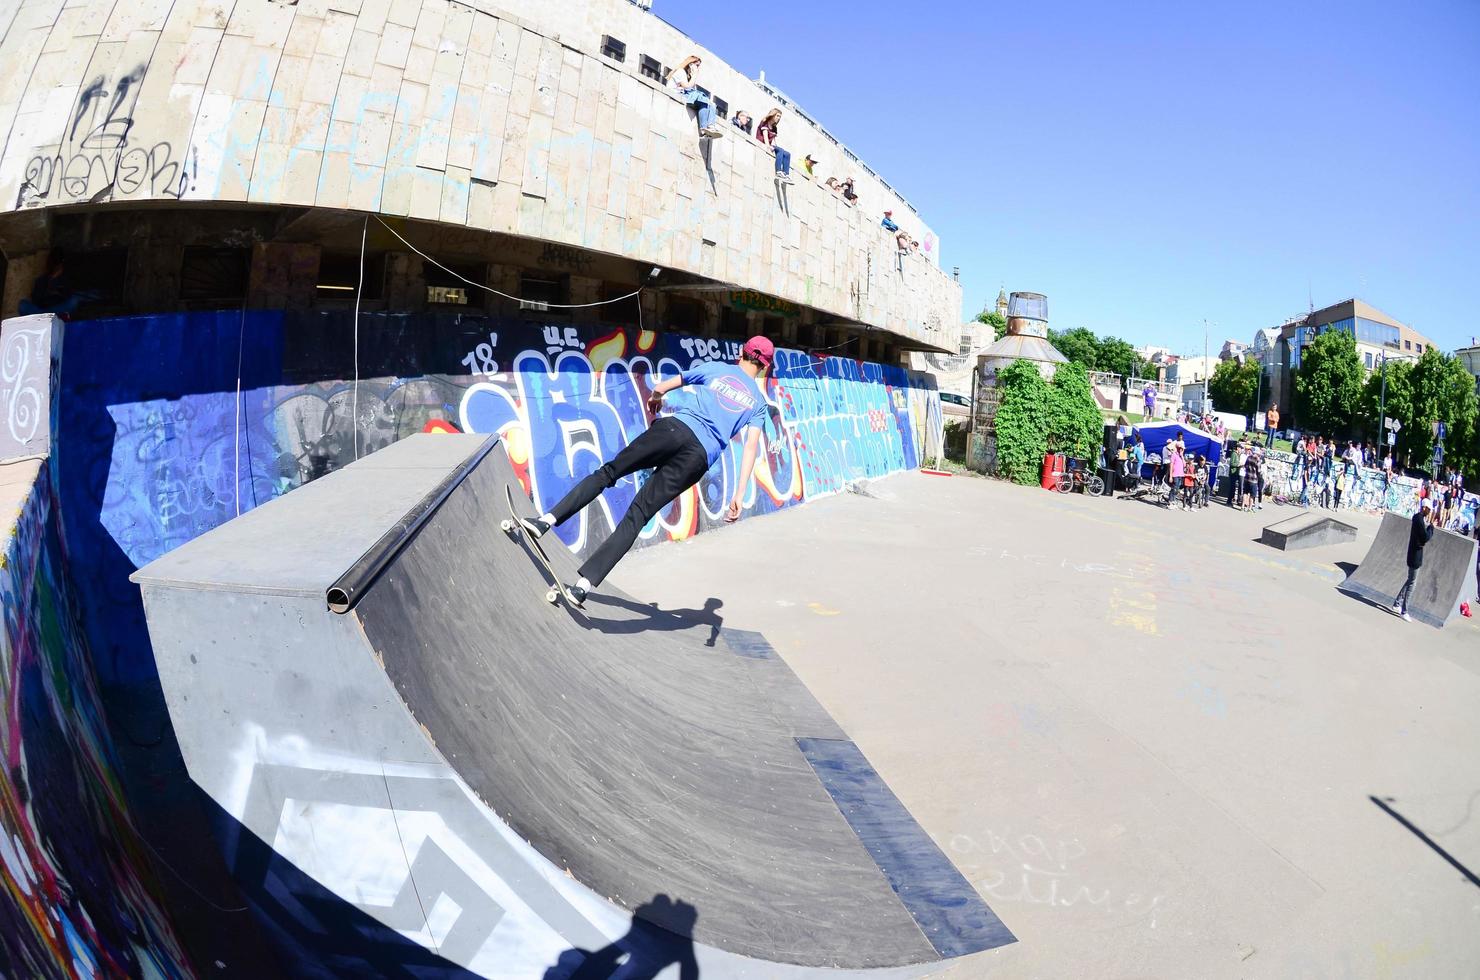 KHARKIV, UKRAINE - 27 MAY, 2022 Skateboarding contest in outdoors skate park during the annual festival of street cultures photo